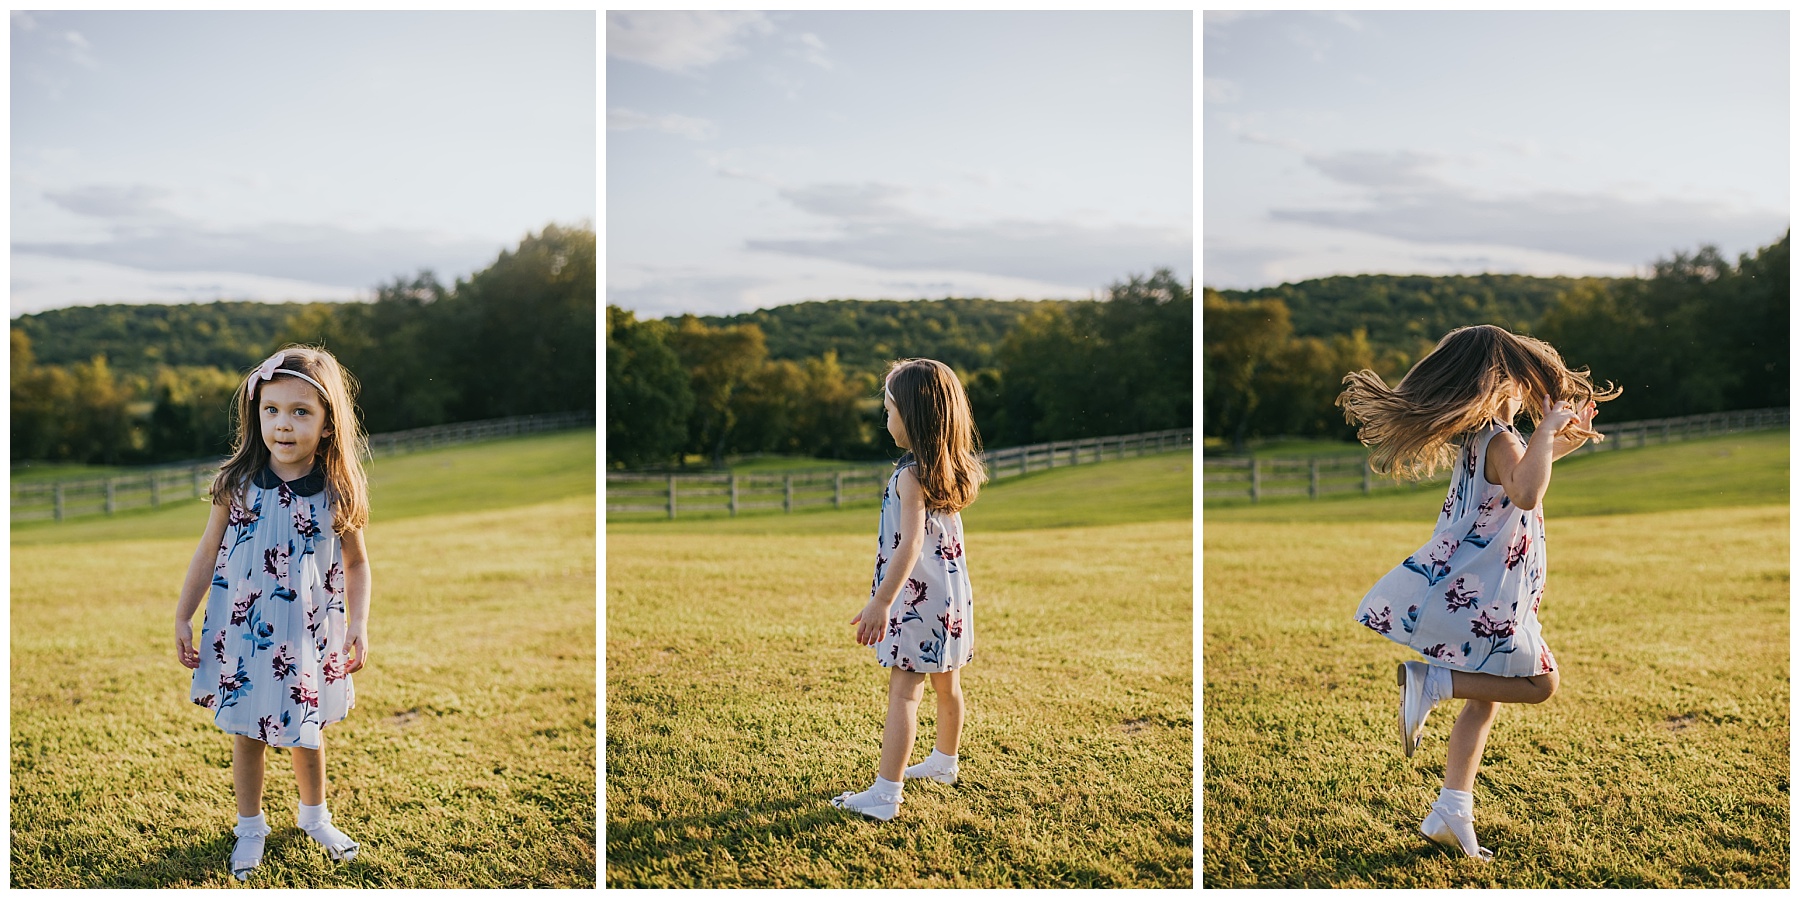 Little girl dancing at a Farm in Fairfield County, Ct Kendra Conroy Photography